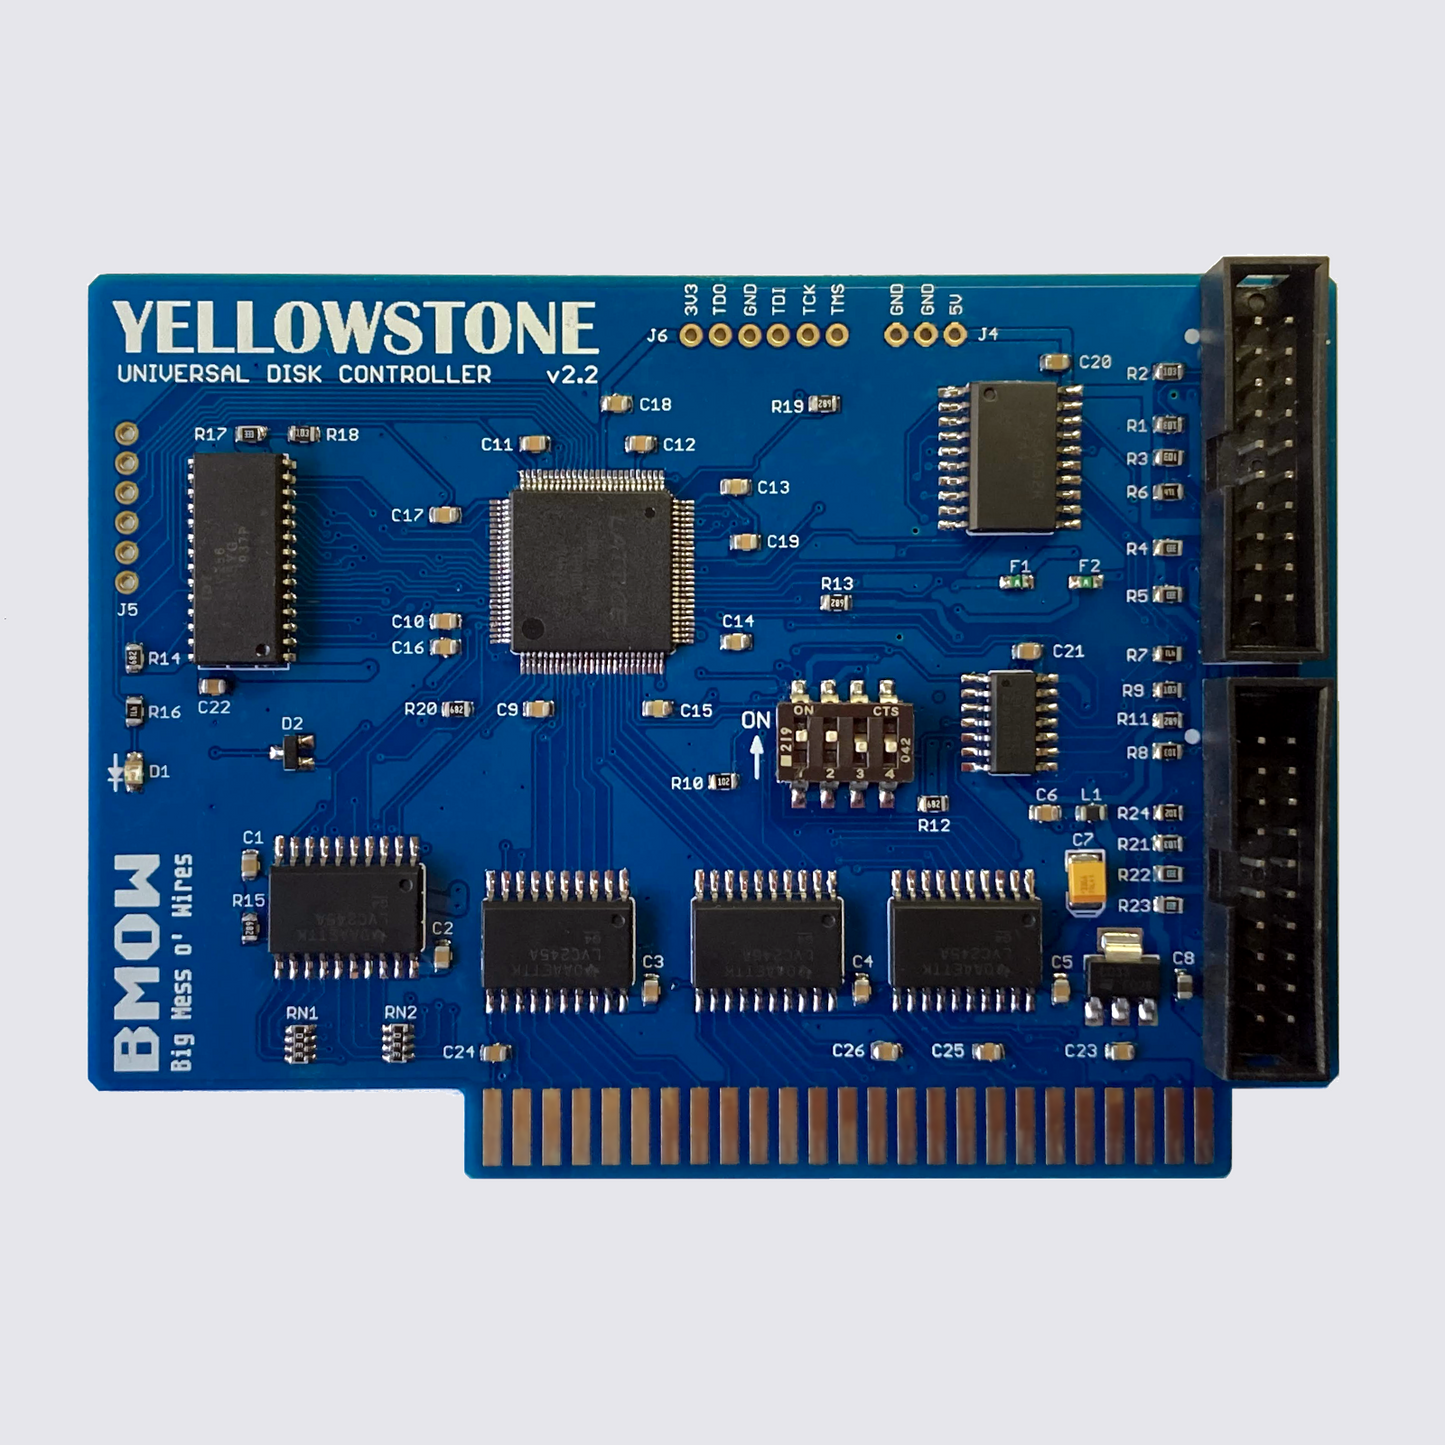 Yellowstone Universal Disk Controller